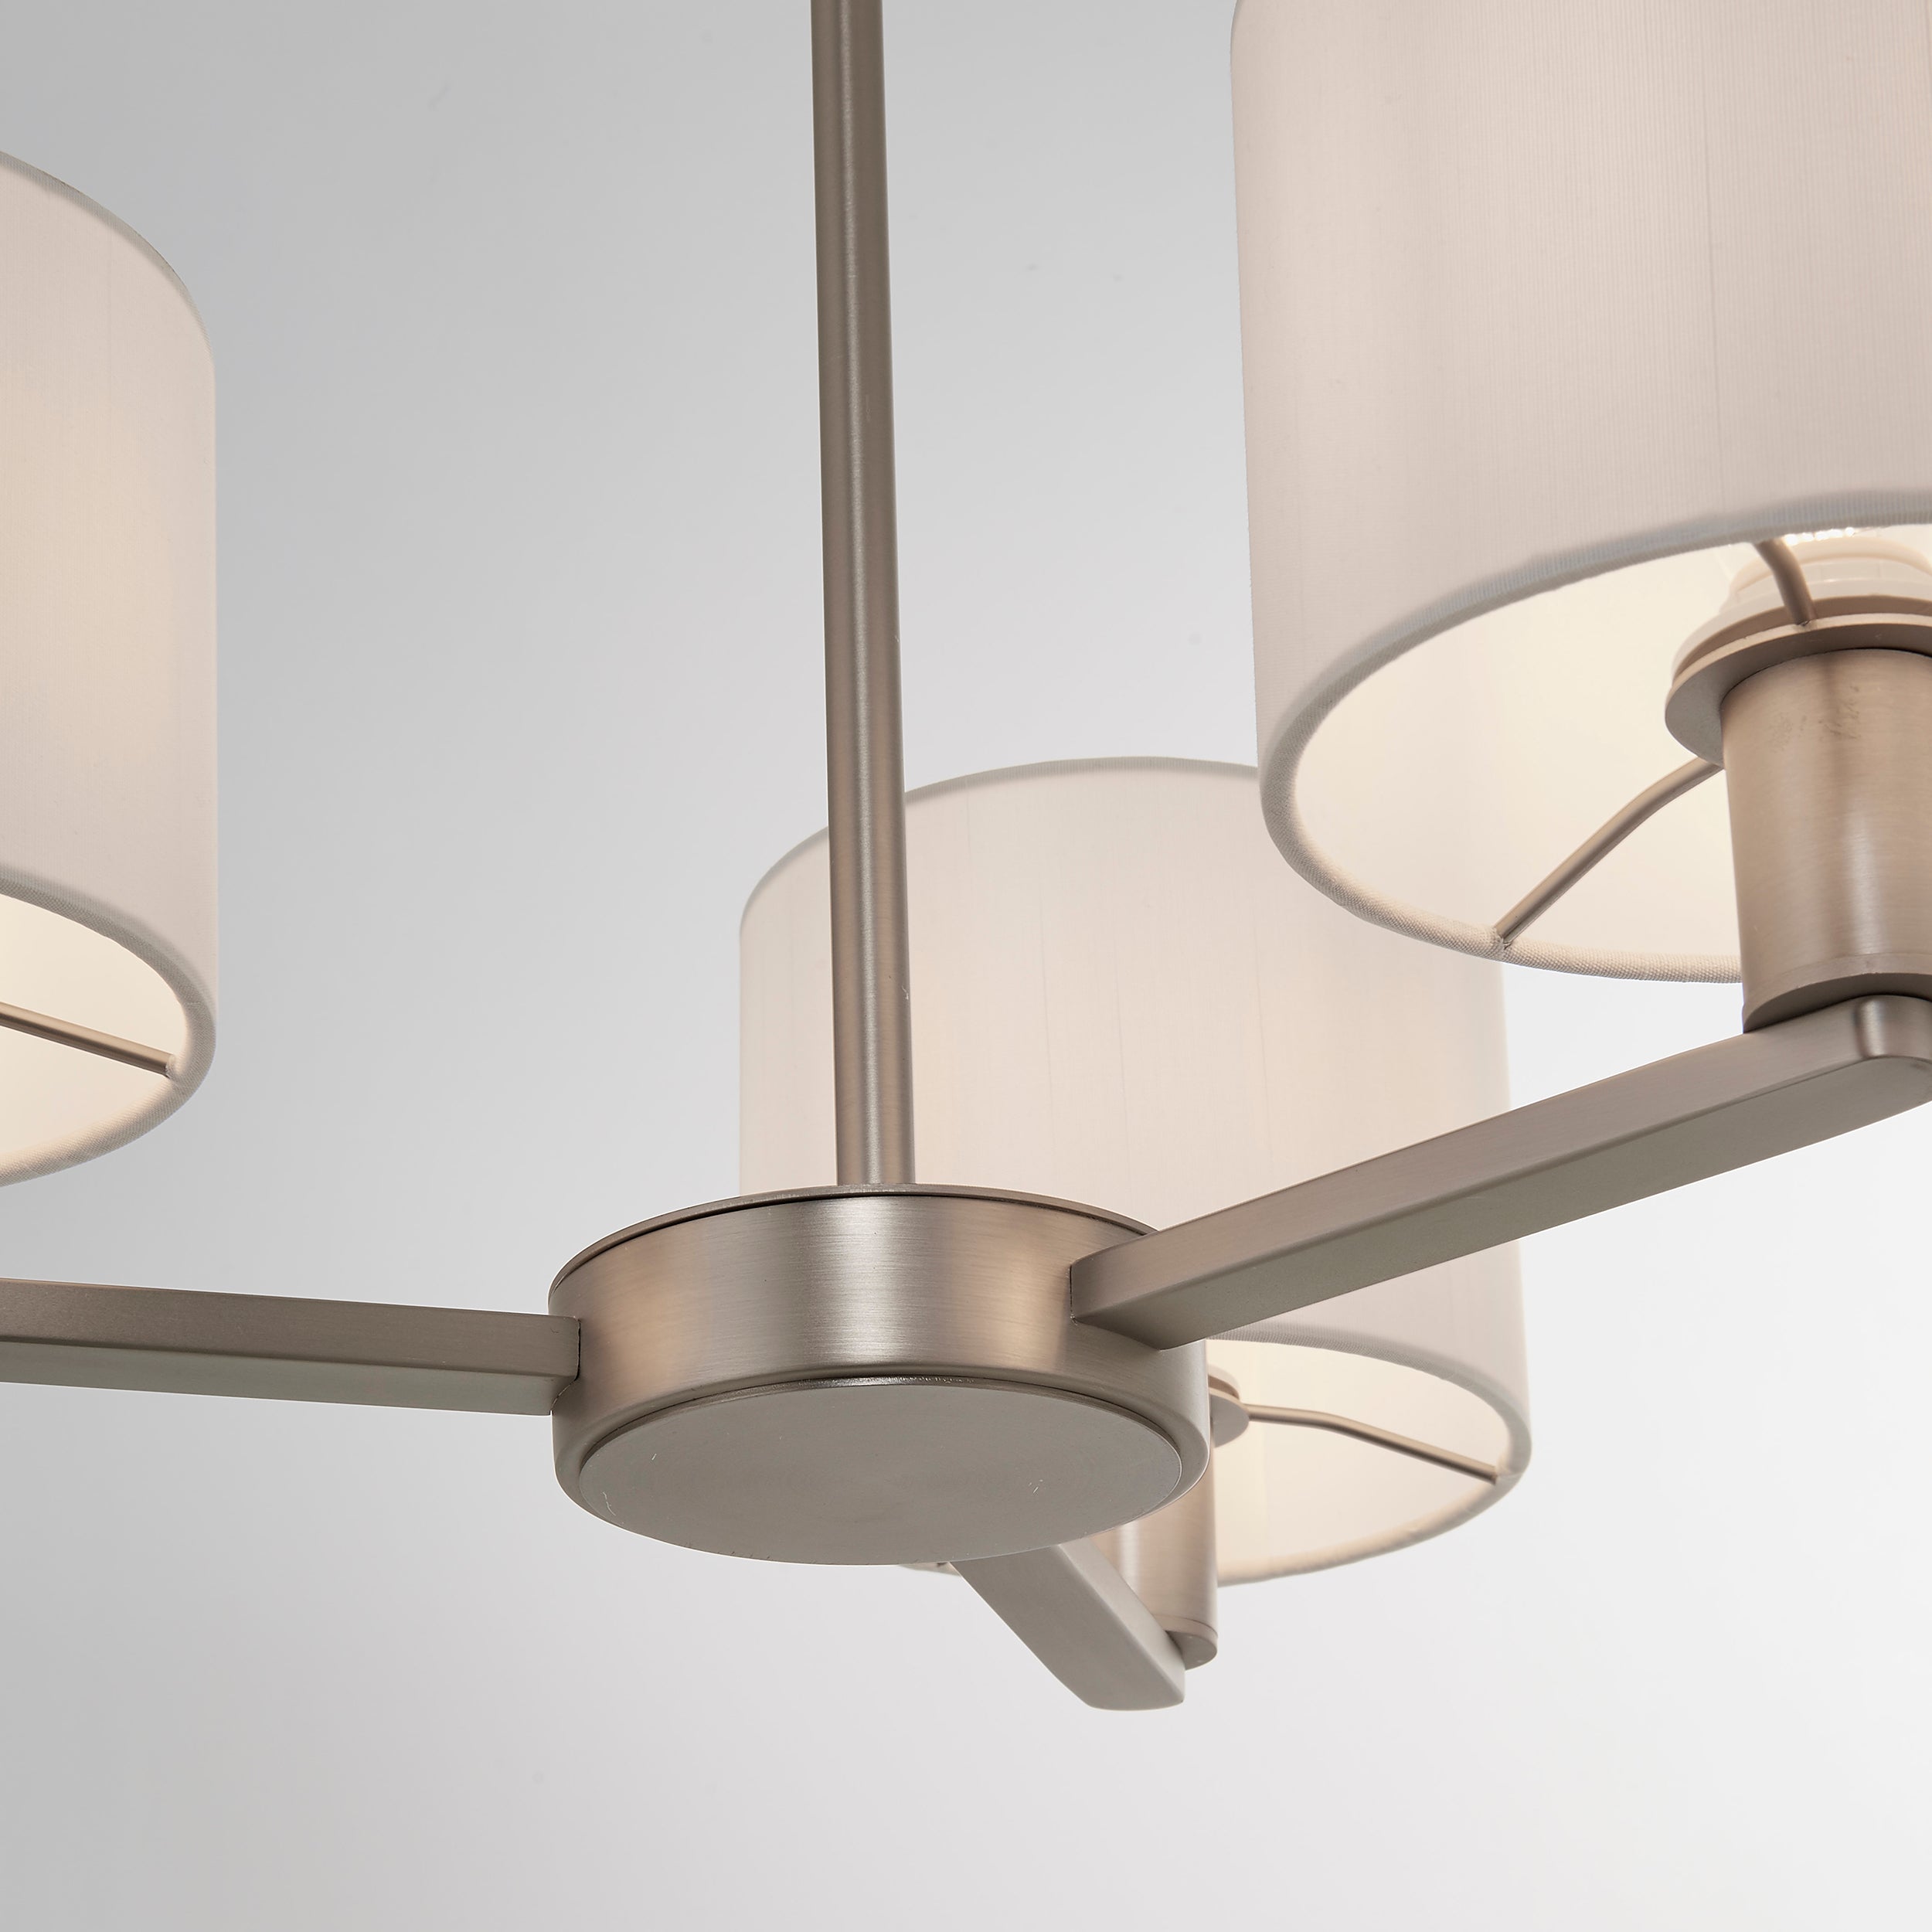 Daley 3 Light Pendant. Nickel With Vintage White Shades